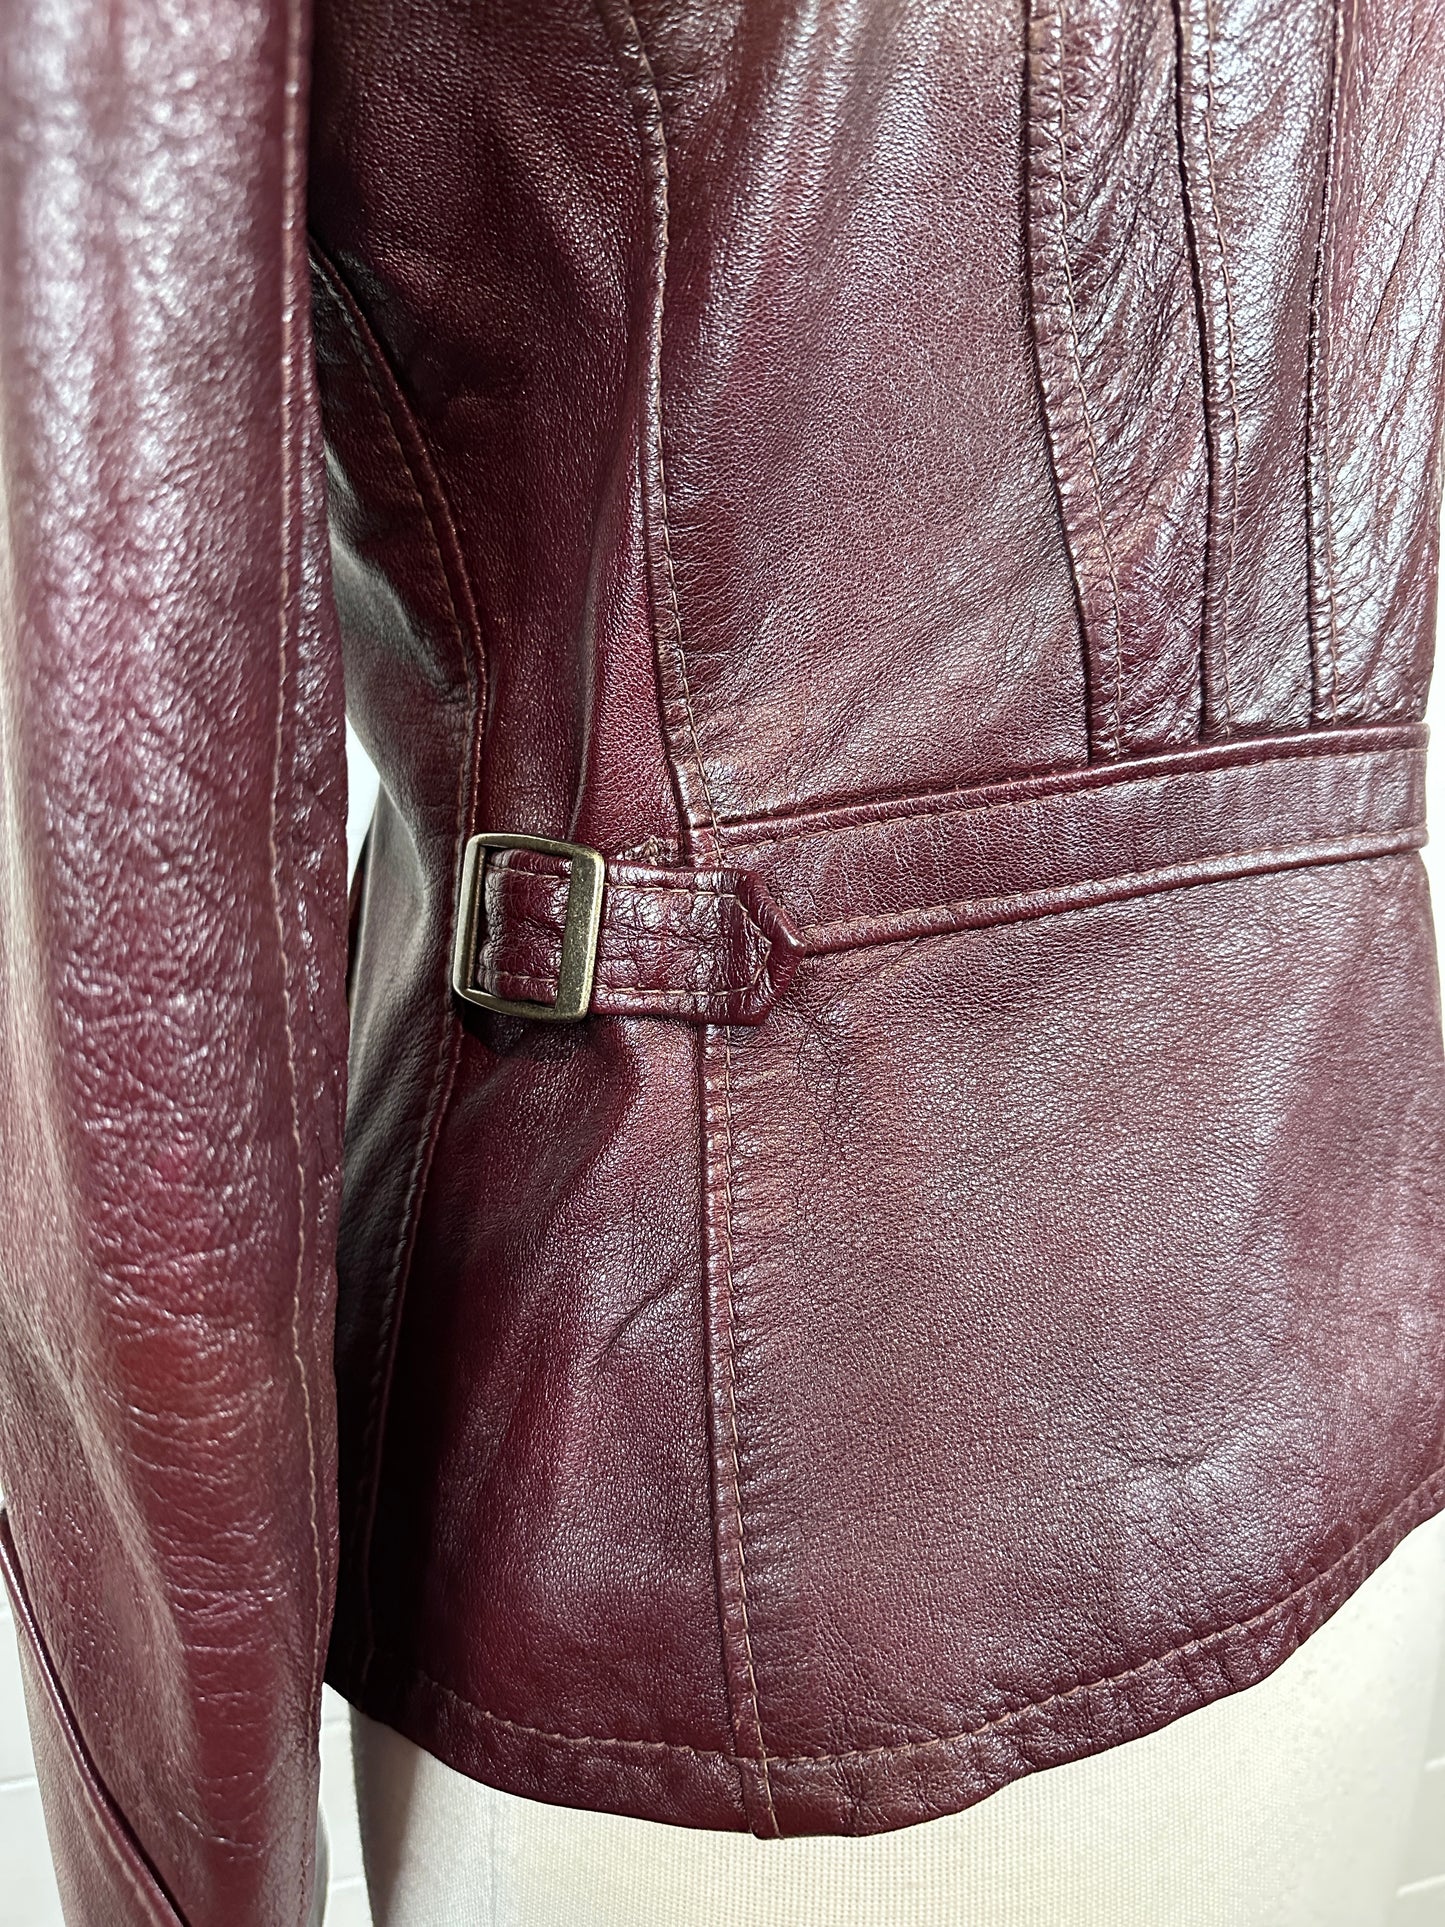 1970's Oxblood Fitted Leather Jacket - MINTY!